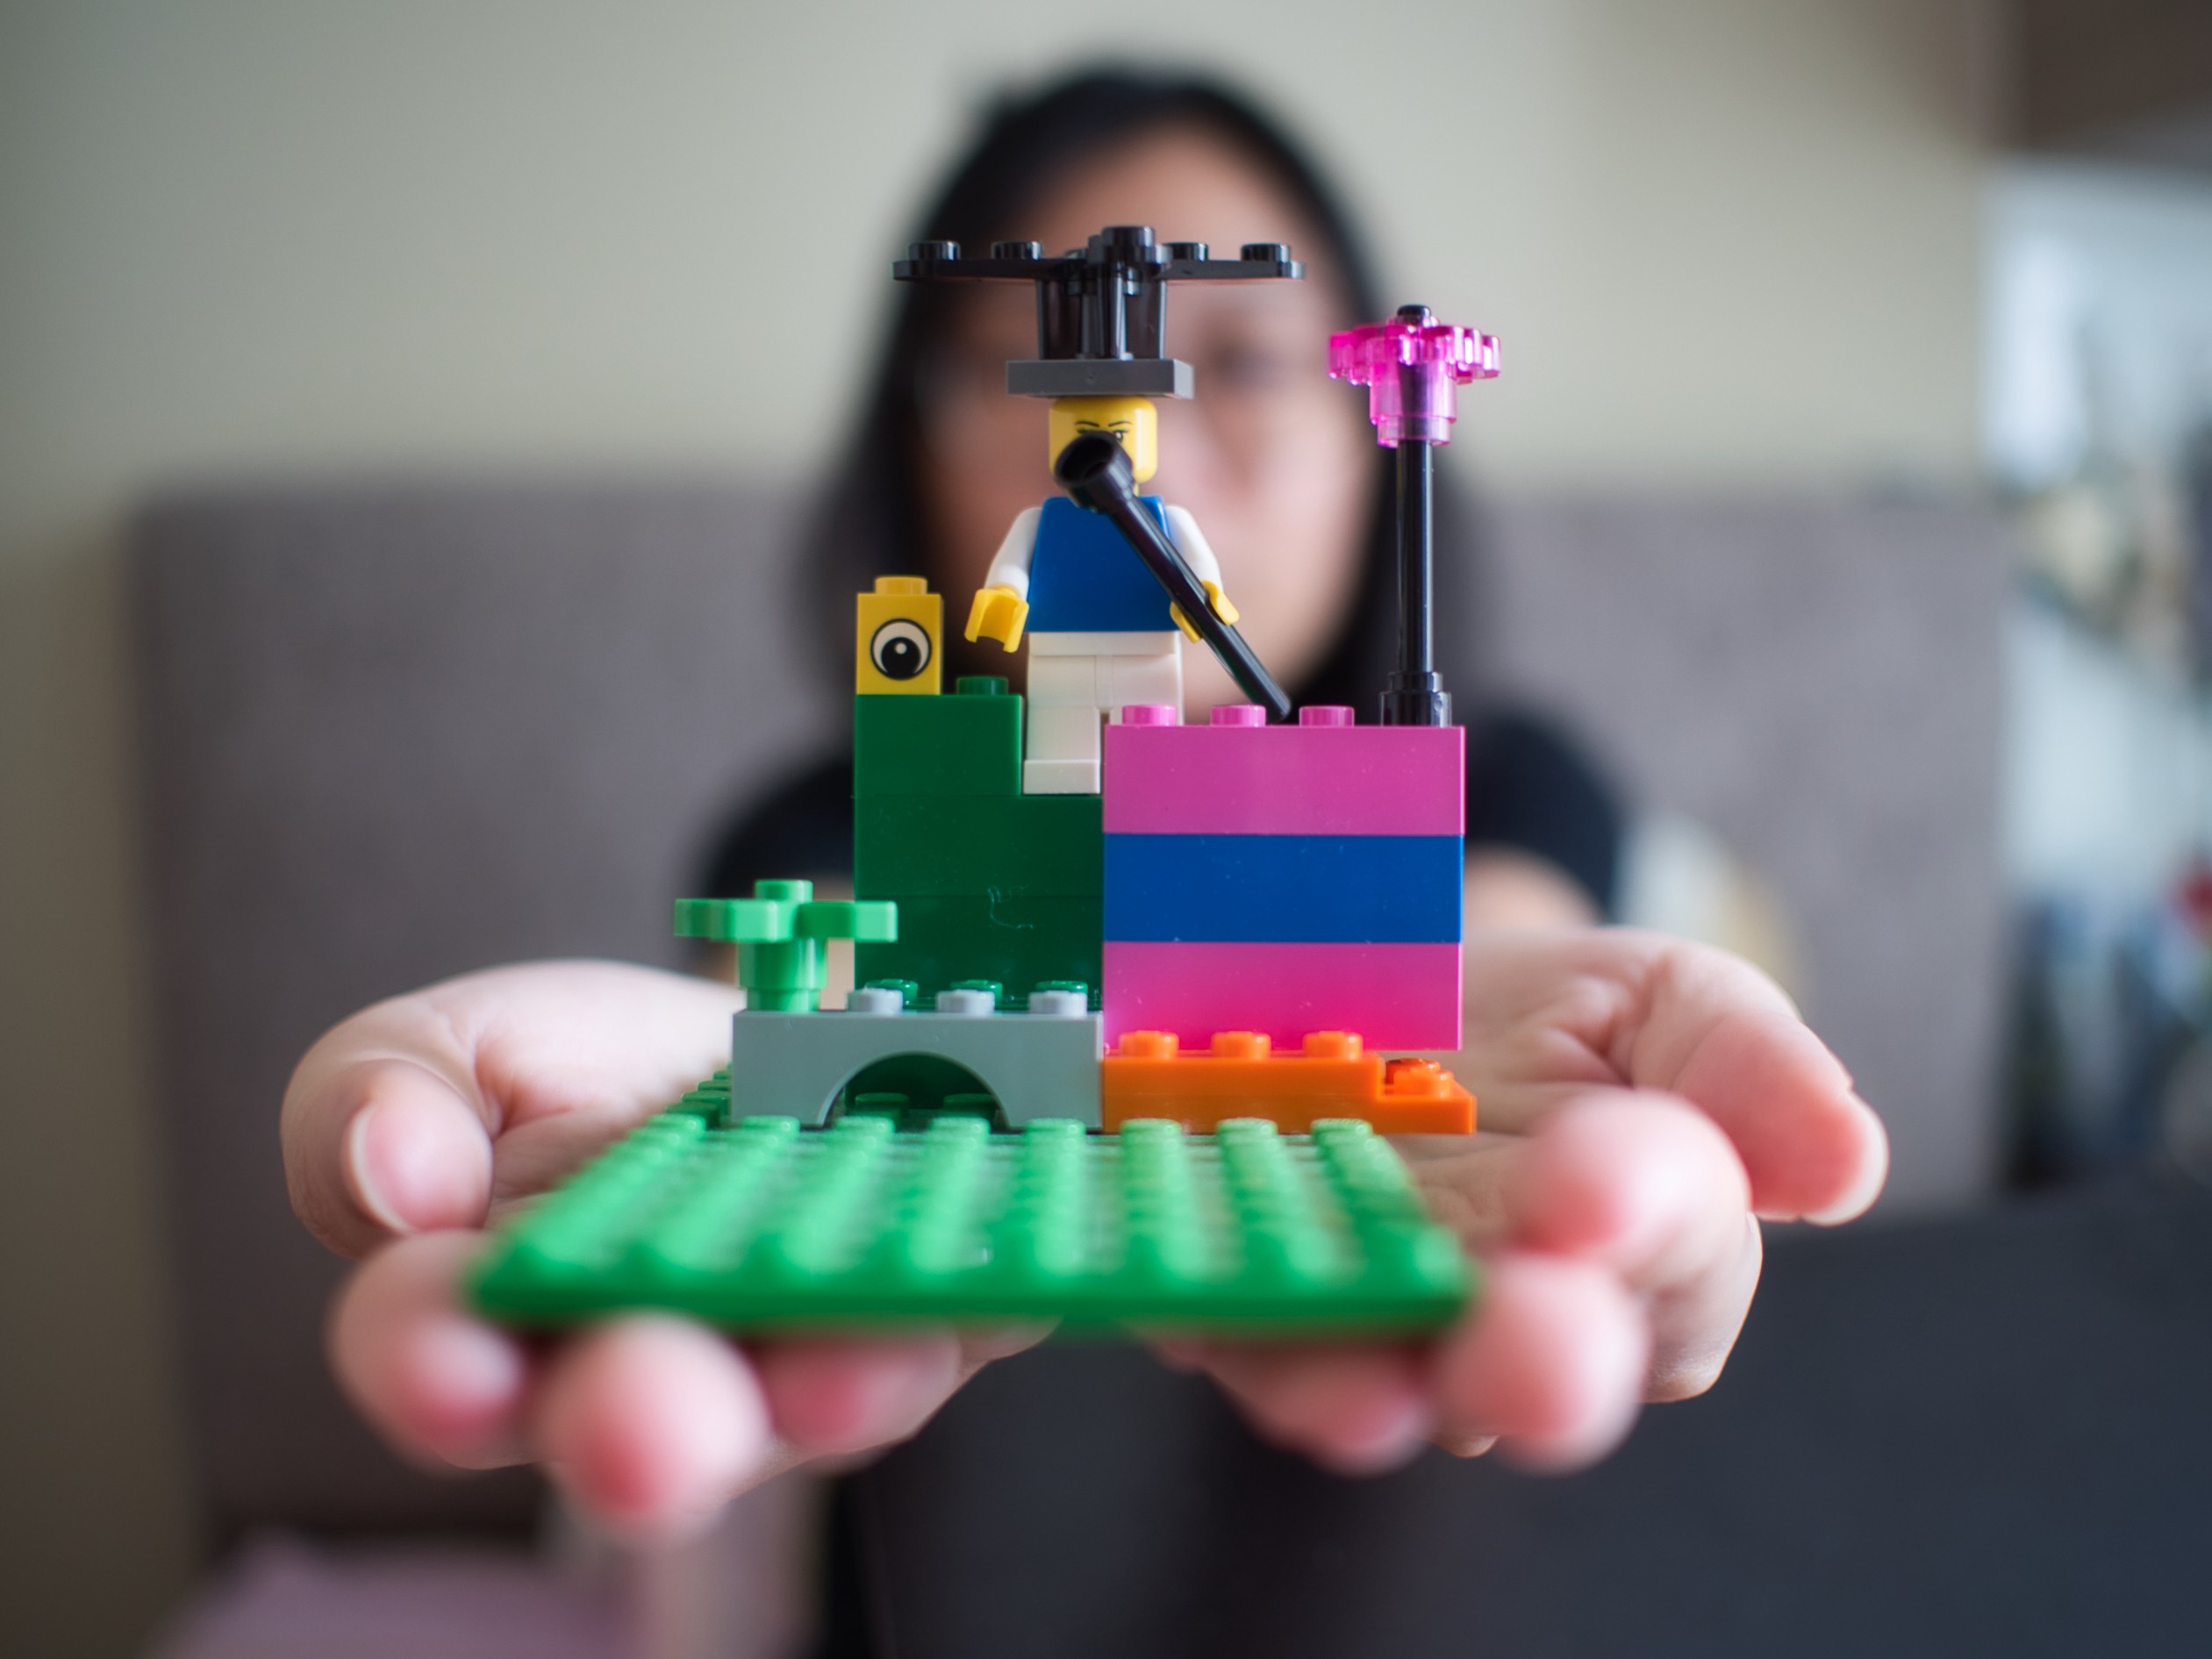 young girl in background holding out a lego board with building creation that takes up the foreground